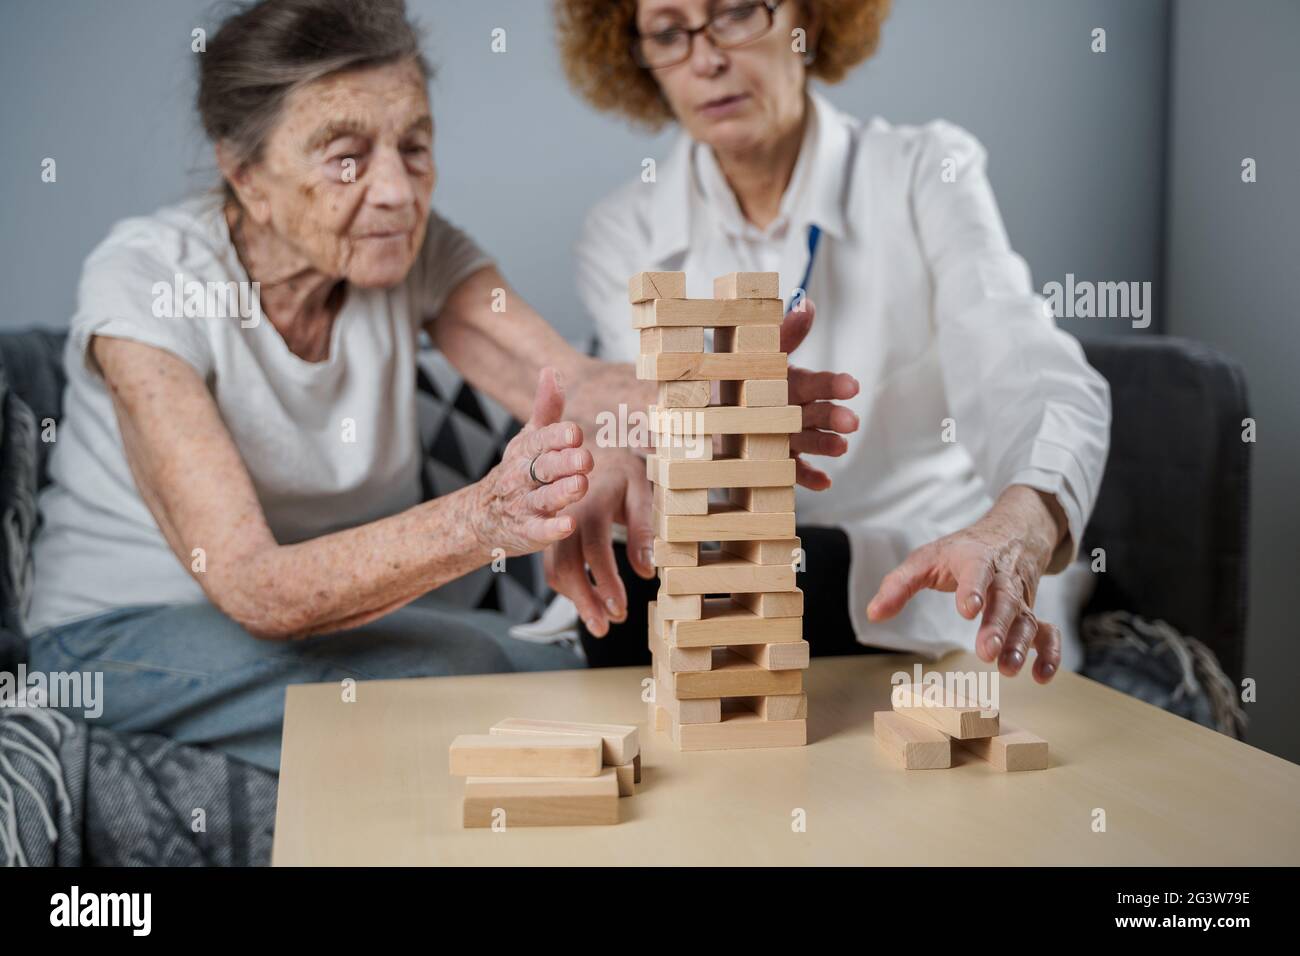 Dementia therapy in playful way, training fingers and fine motor skills, build wooden blocks into tower, playing Jenga. Senior w Stock Photo